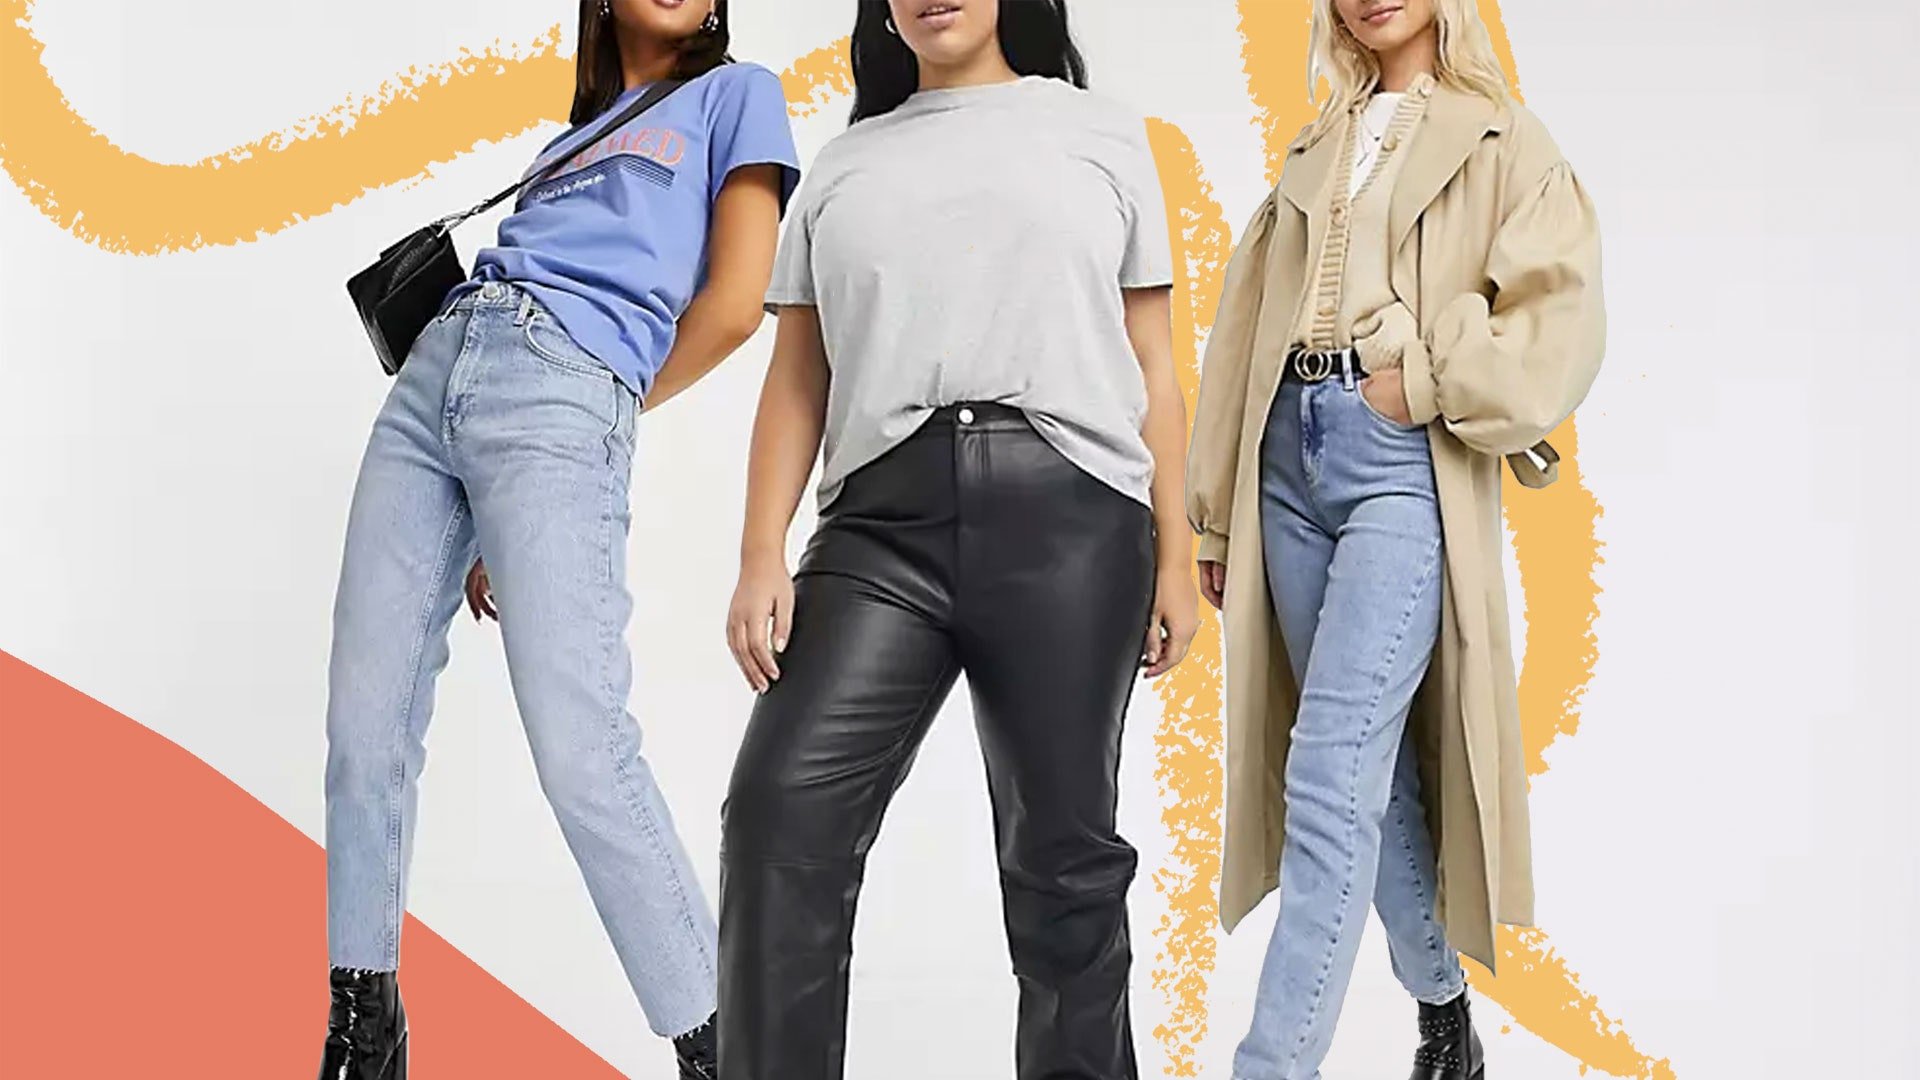 There's up to 80% off everything for the ASOS Cyber Monday sale (plus an extra 20% off discount code) and it ends SOON!